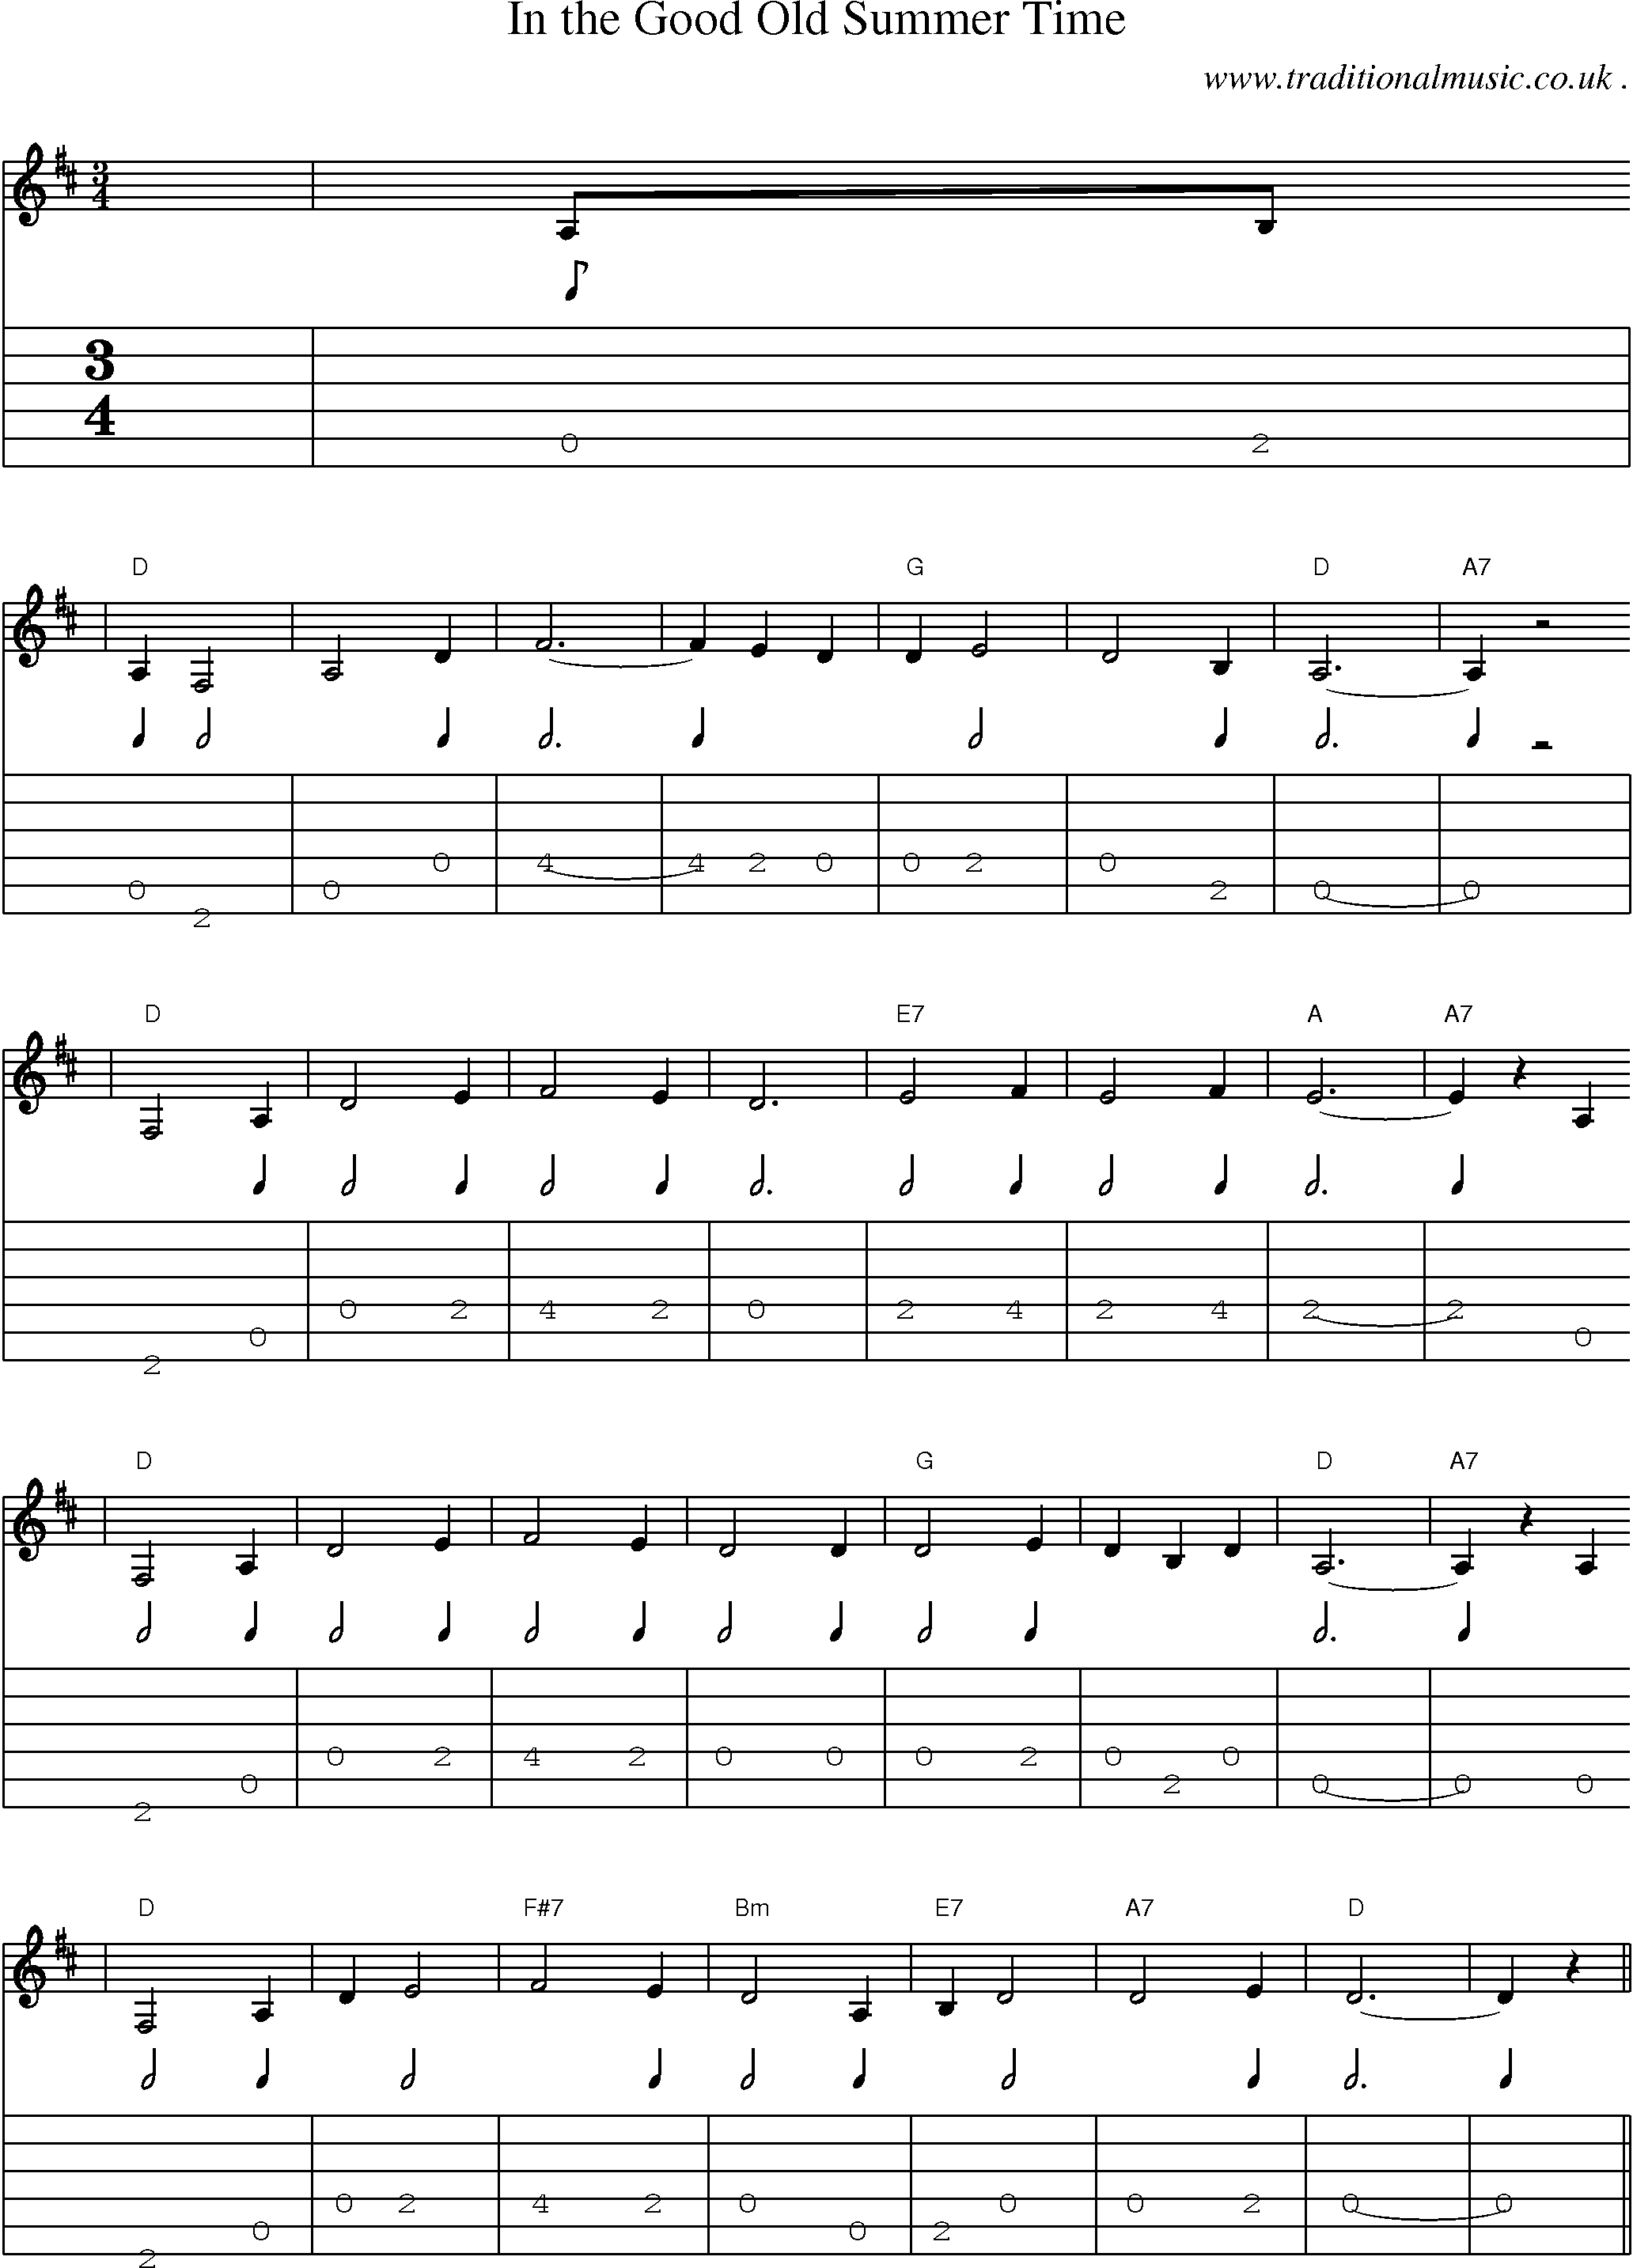 Music Score and Guitar Tabs for In The Good Old Summer Time